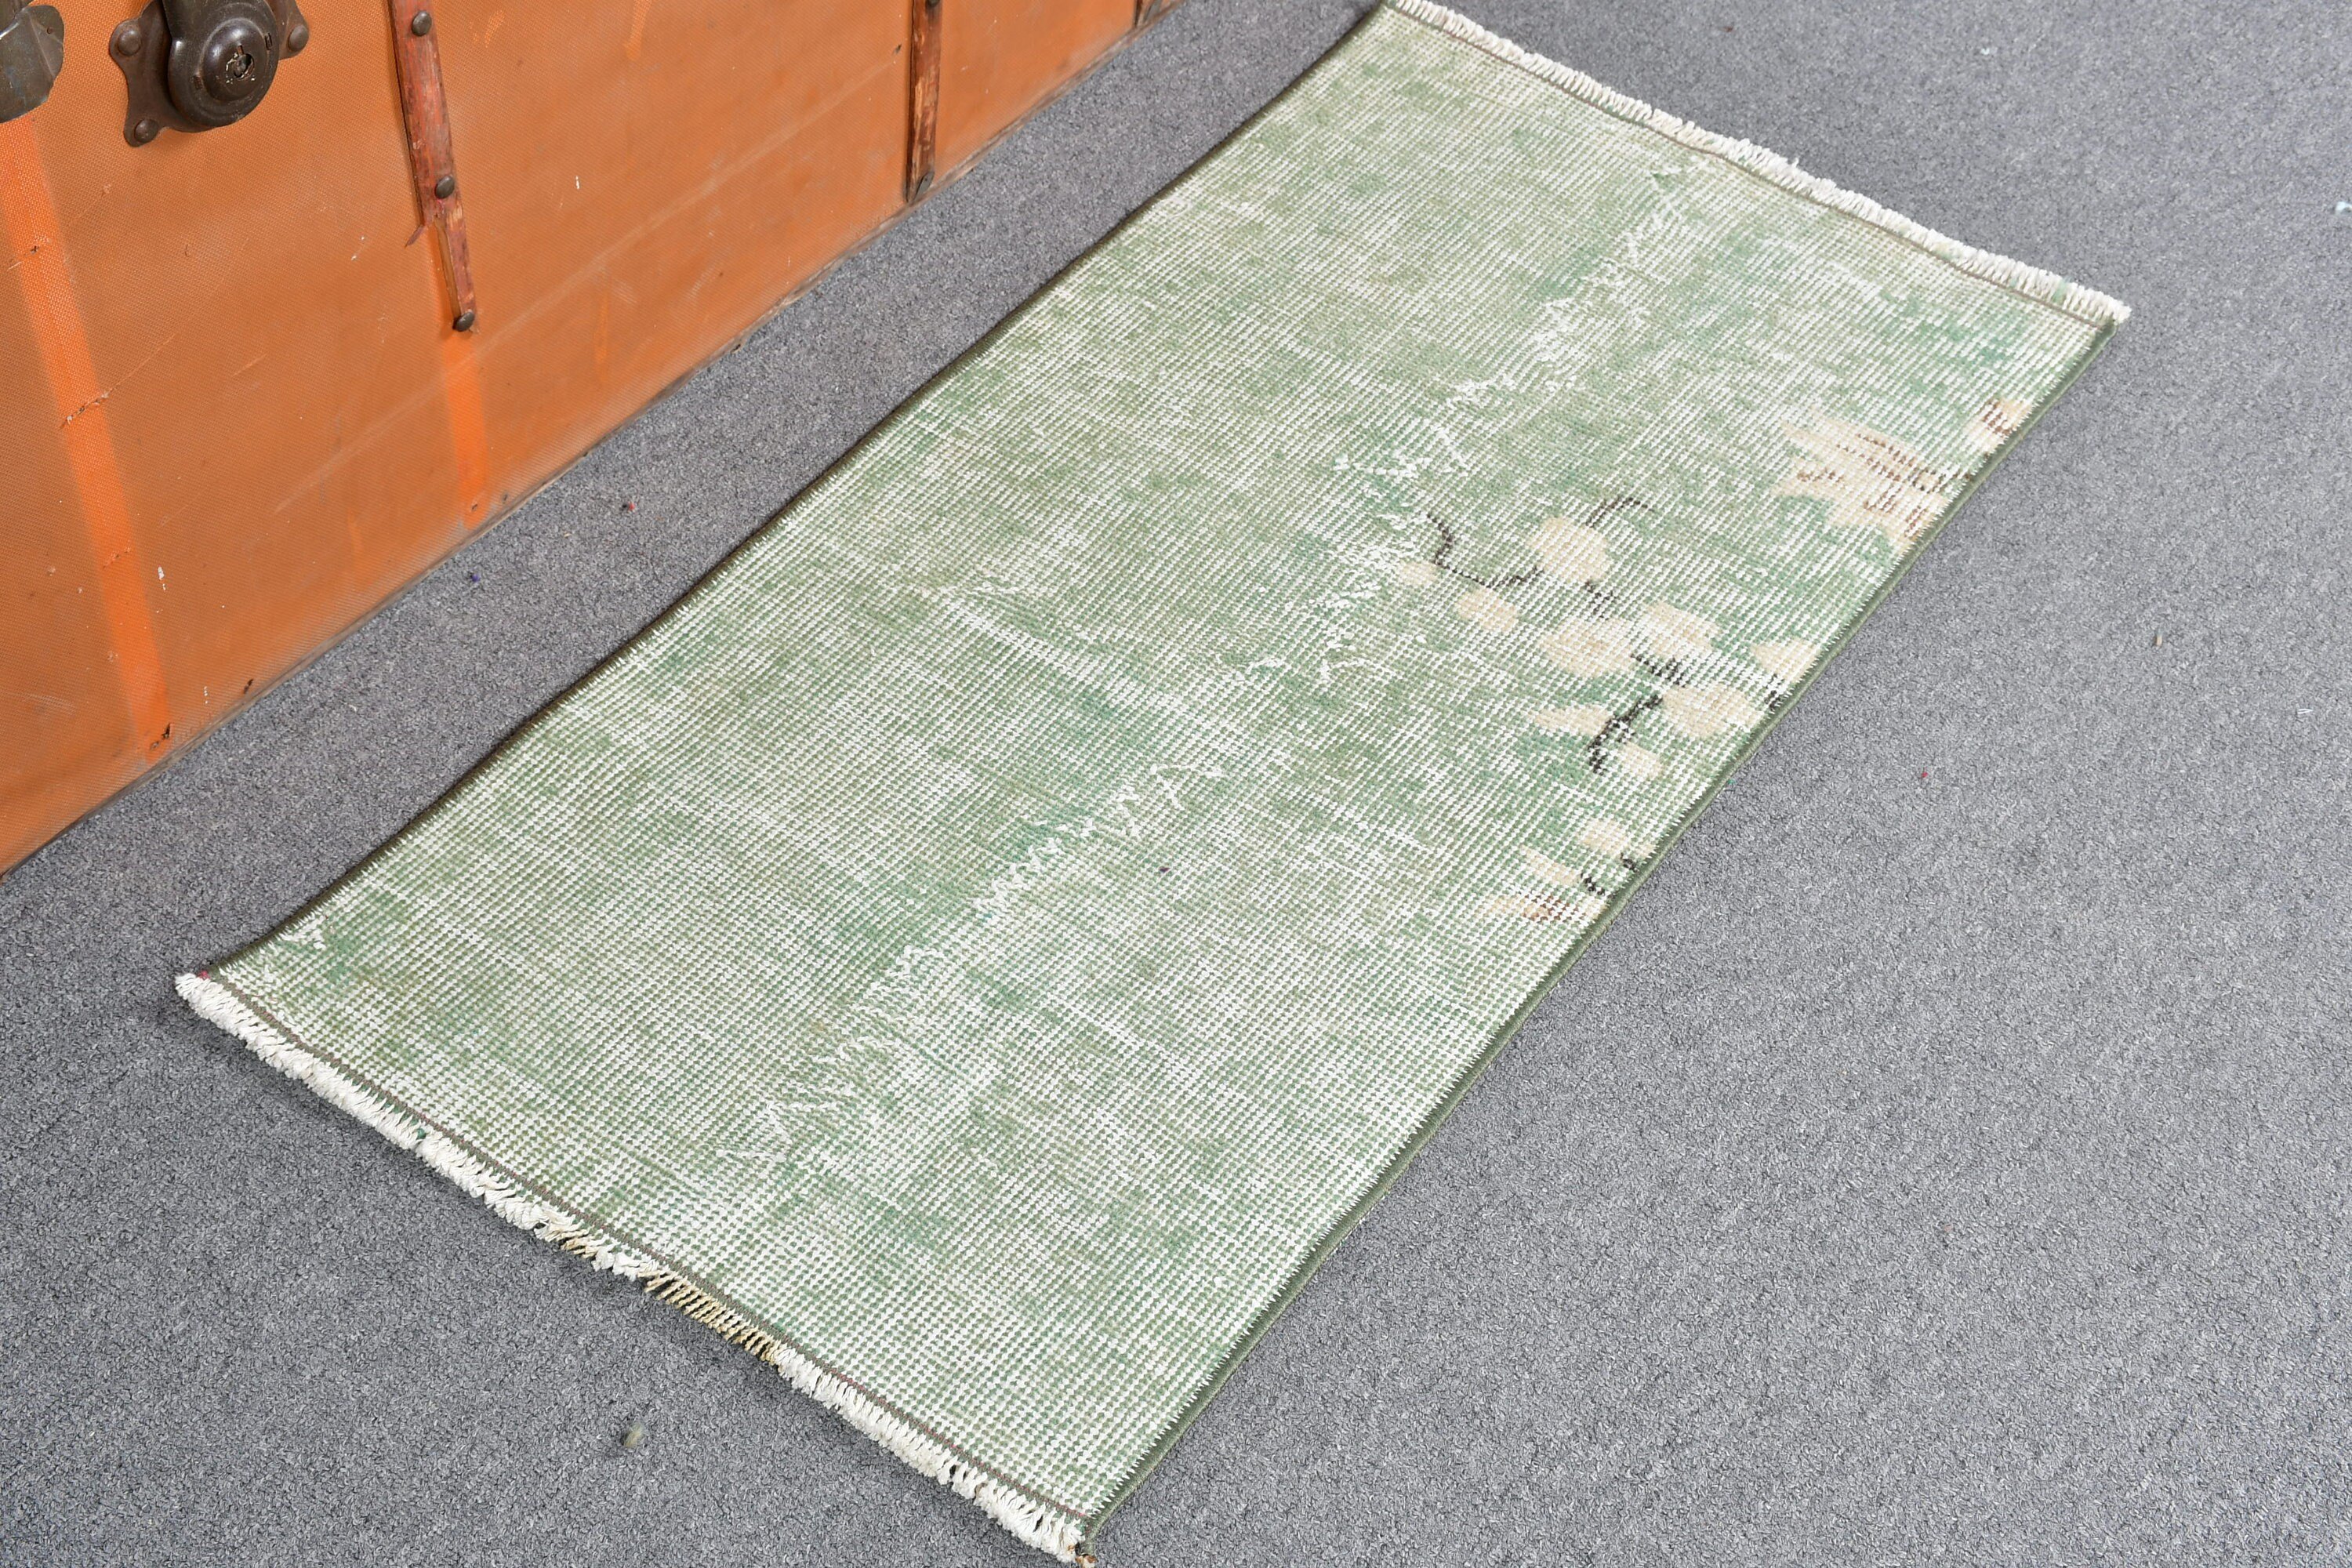 Rugs for Kitchen, Cool Rug, Antique Rug, Wall Hanging Rugs, Turkish Rug, 1.5x3 ft Small Rug, Bedroom Rug, Green Kitchen Rug, Vintage Rugs